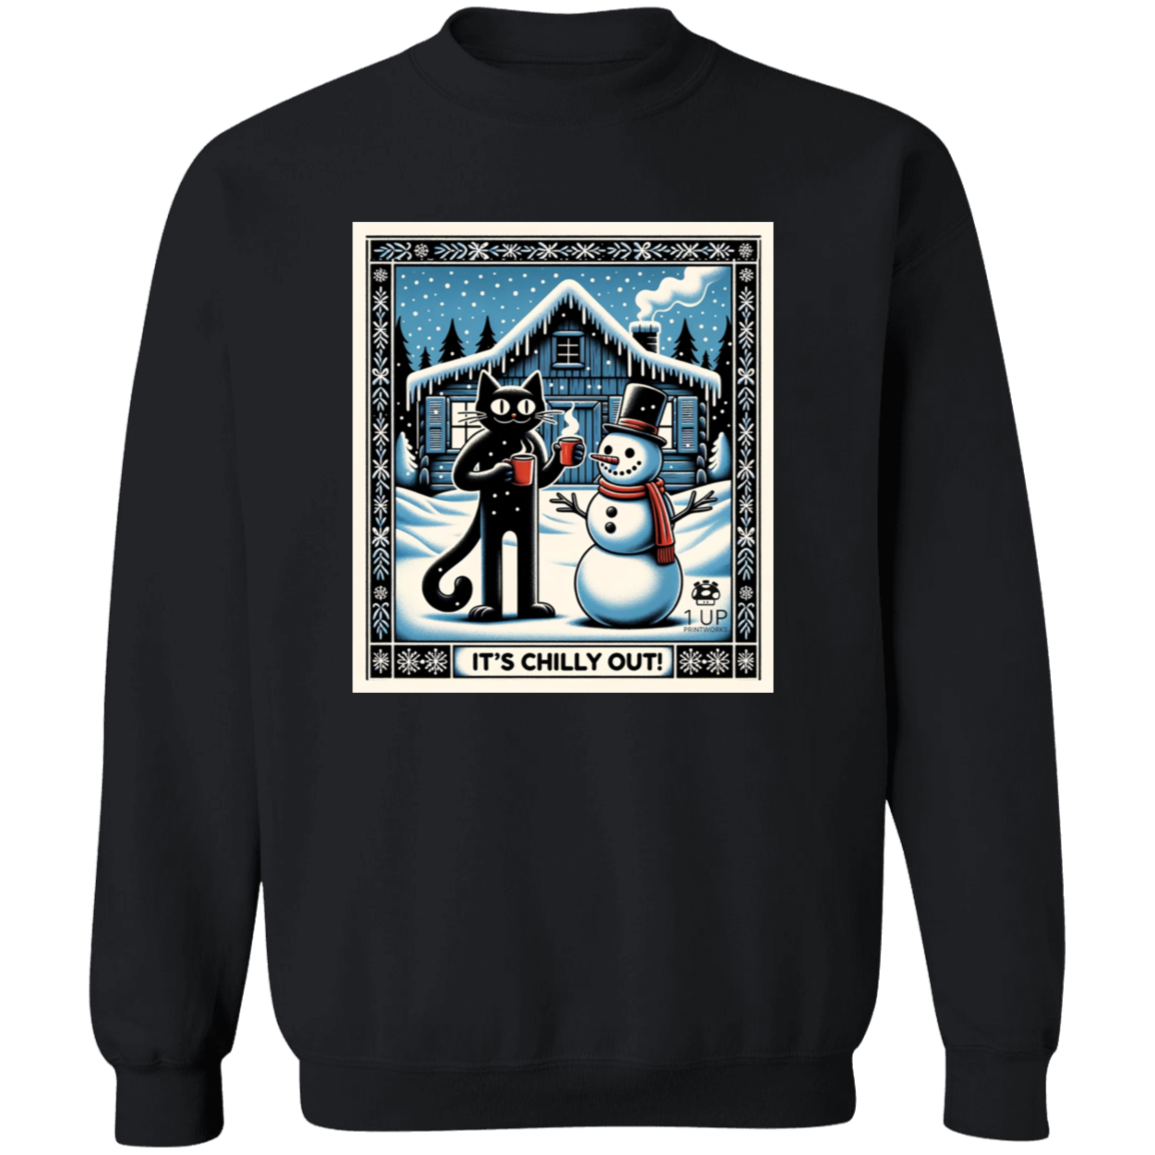 It's Chilly Out Crewneck Pullover Sweatshirt